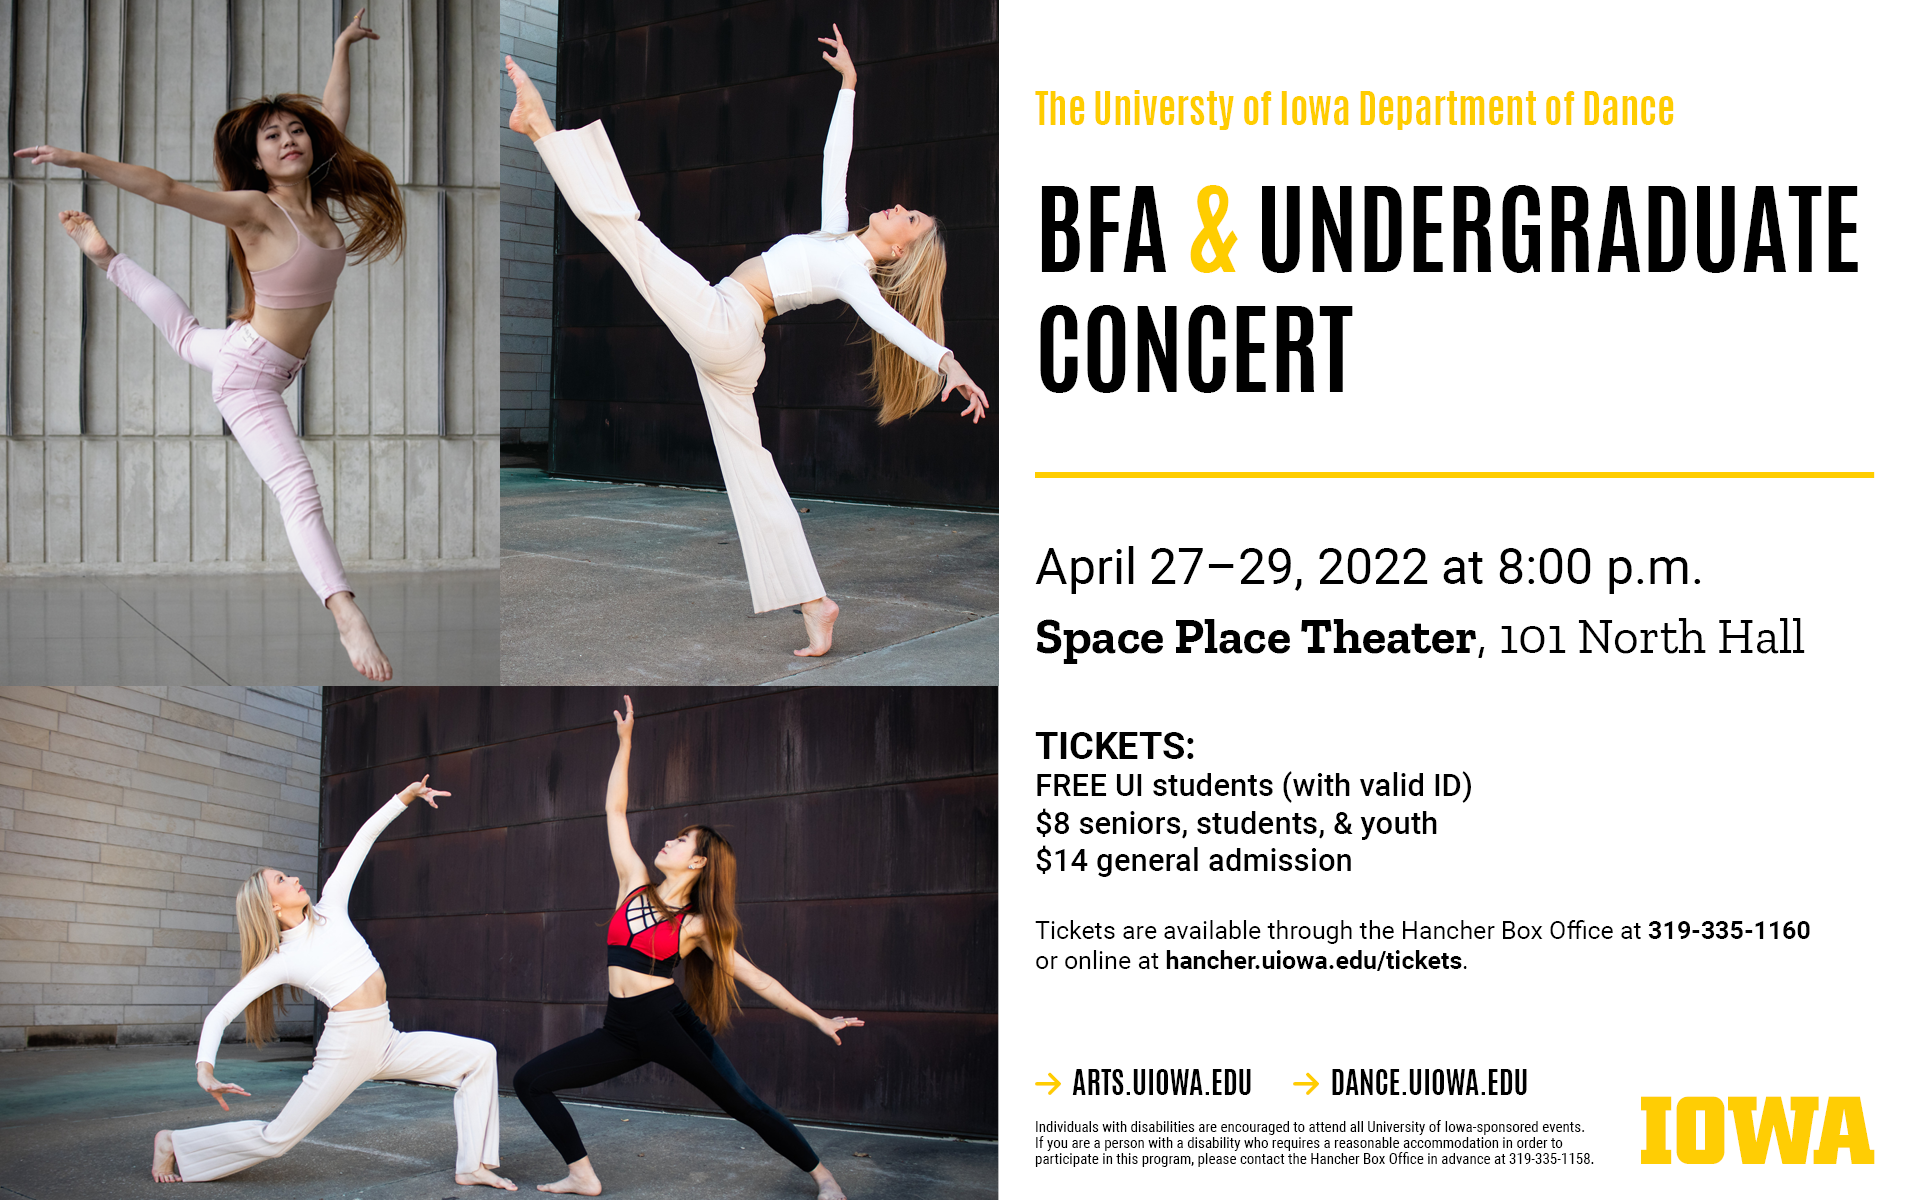 UI Dance BFA & Undergraduate Concert. April 27-29 at 8pm, Space Place Theatre. Tickets: Free for UI students, $8 for seniors and youth, $14 general admission. arts.uiowa.edu. dance.uiowa.edu. Individuals with disabilities are encouraged to attend all University of Iowa-sponsored events. If you are a person with a disability who requires a reasonable accommodation in order to participate in this program, please contact the Hancher Box Office in advance at 319-335-1158. Three photos of dancers in movement.